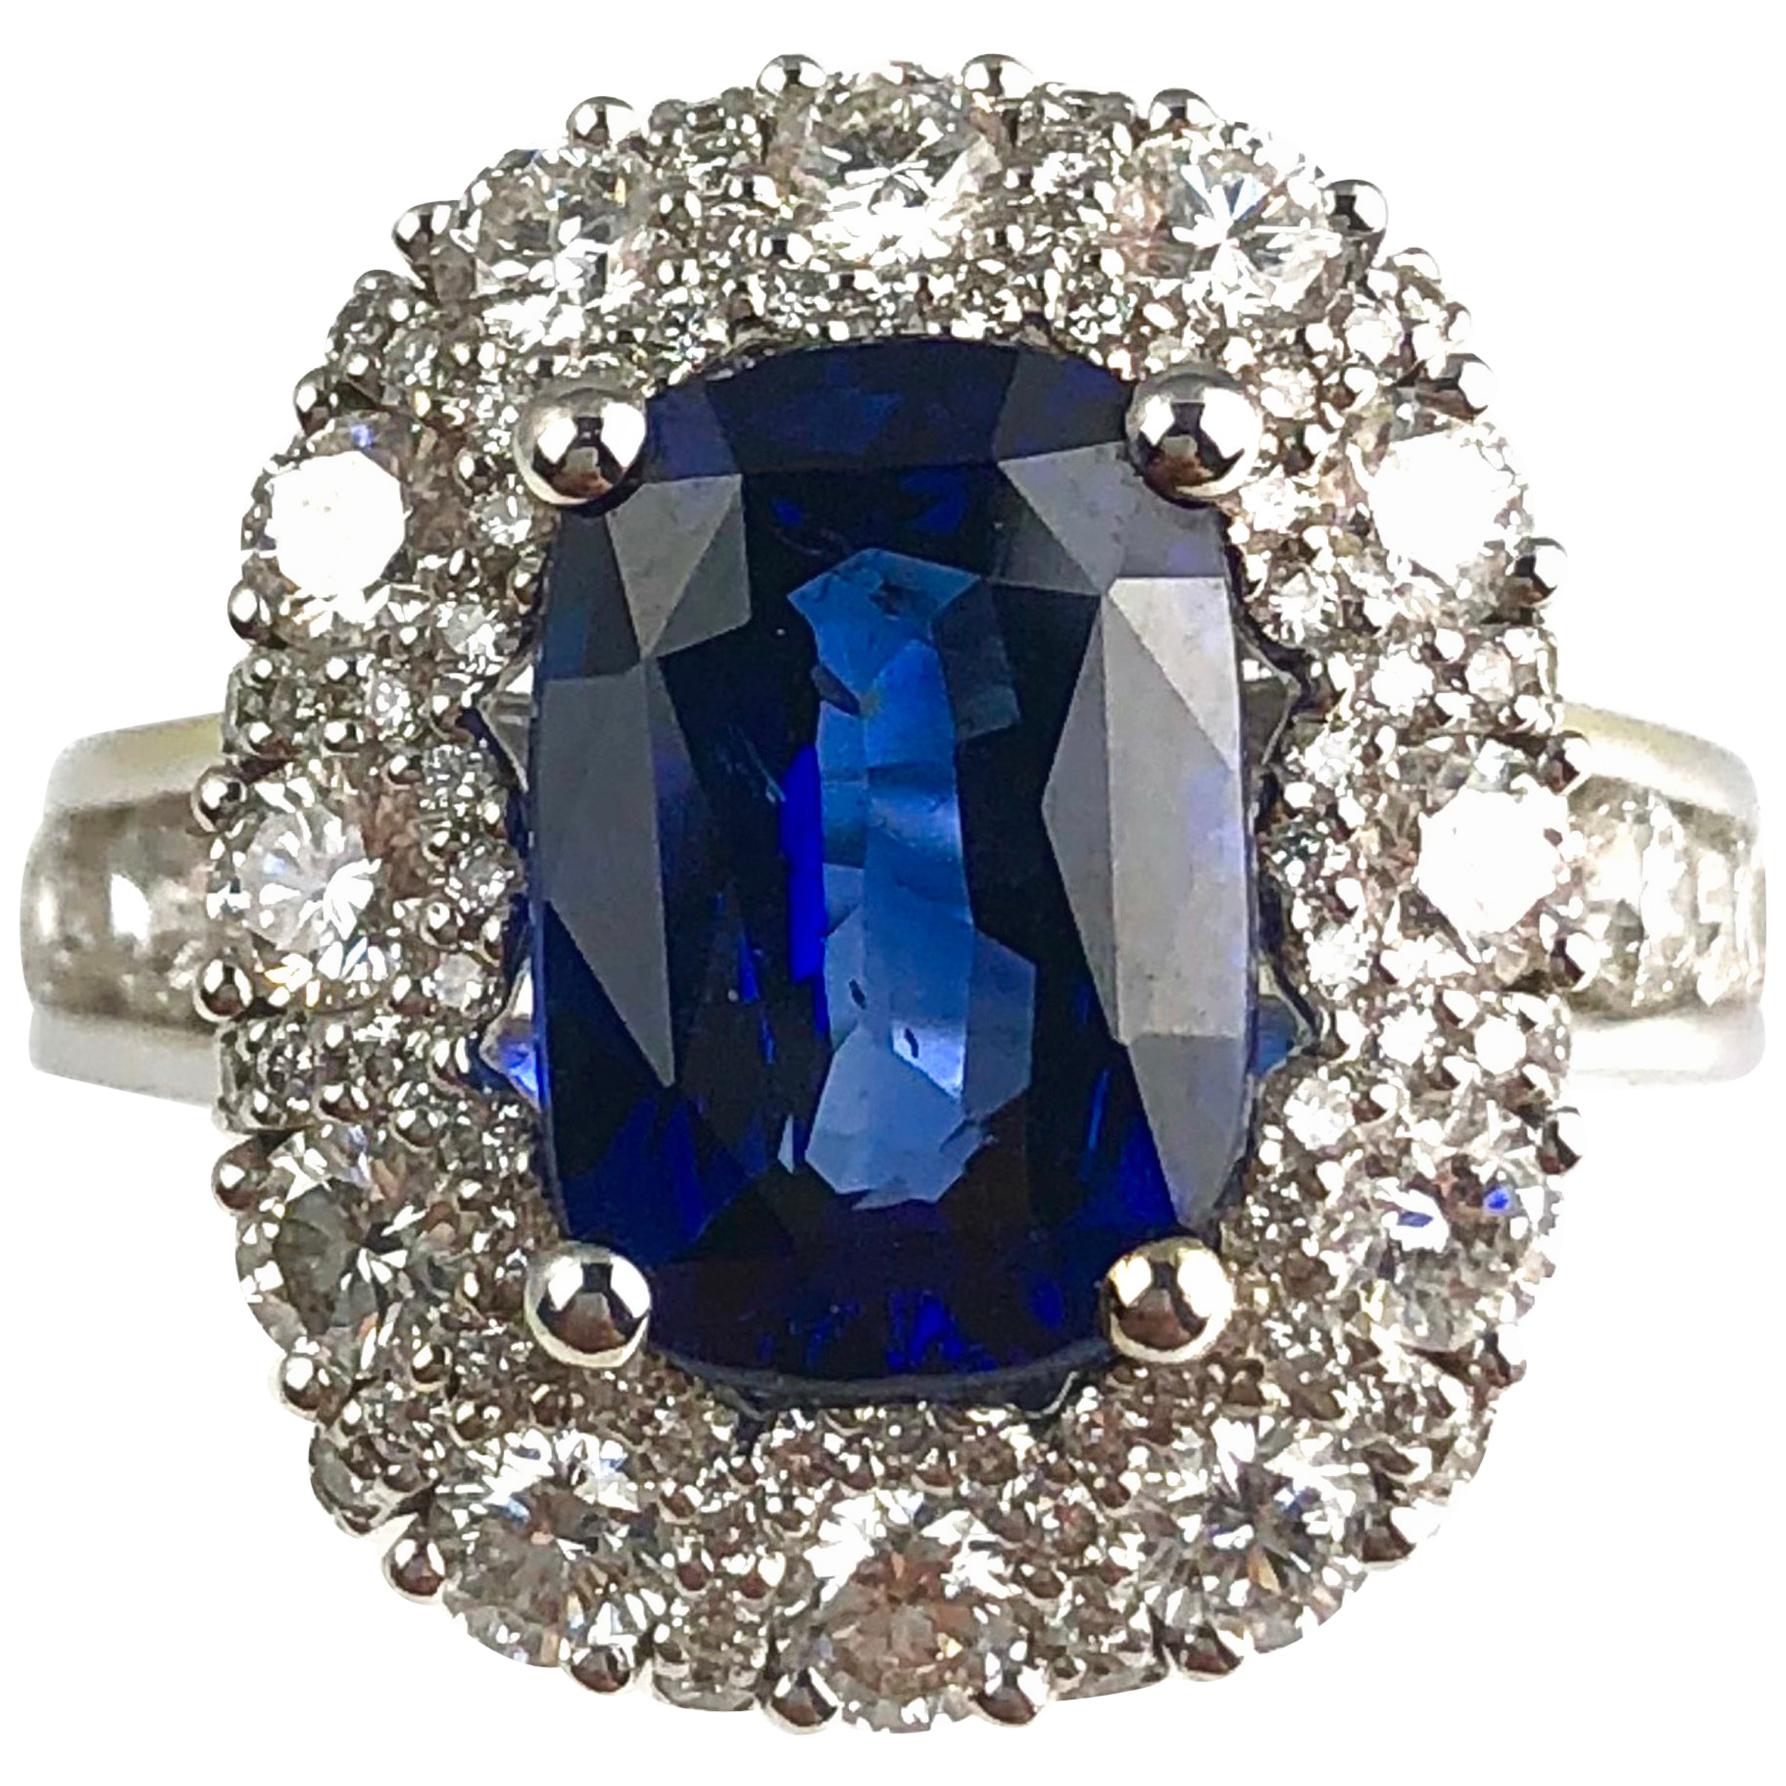 (DiamondTown) A 4.04 carat cushion cut fine Sapphire center, surrounded by a decorated halo of round white diamonds, creates an elegant look for this classic ring Smaller round diamonds fill in the spaces between the 12 main diamonds of the halo.